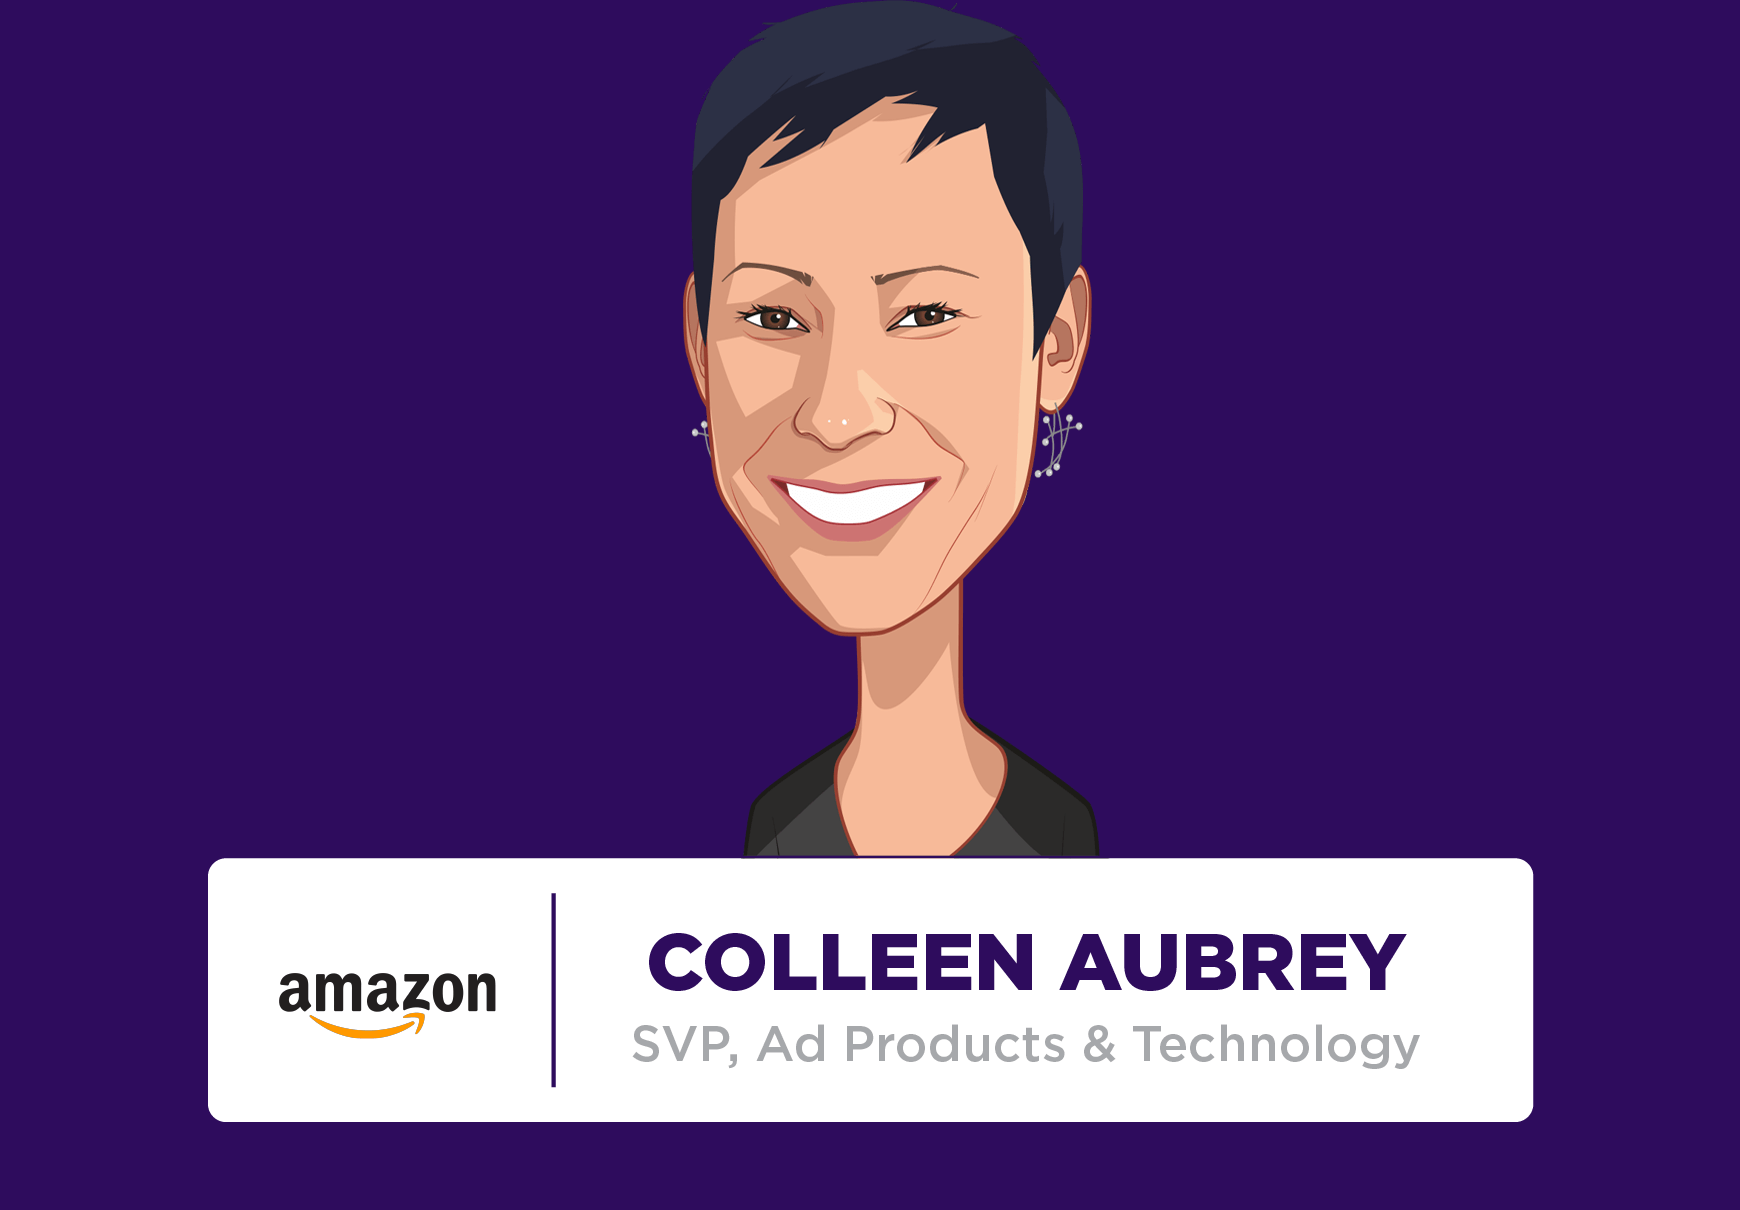 Colleen Aubrey, SVP, Ad Products & Technology